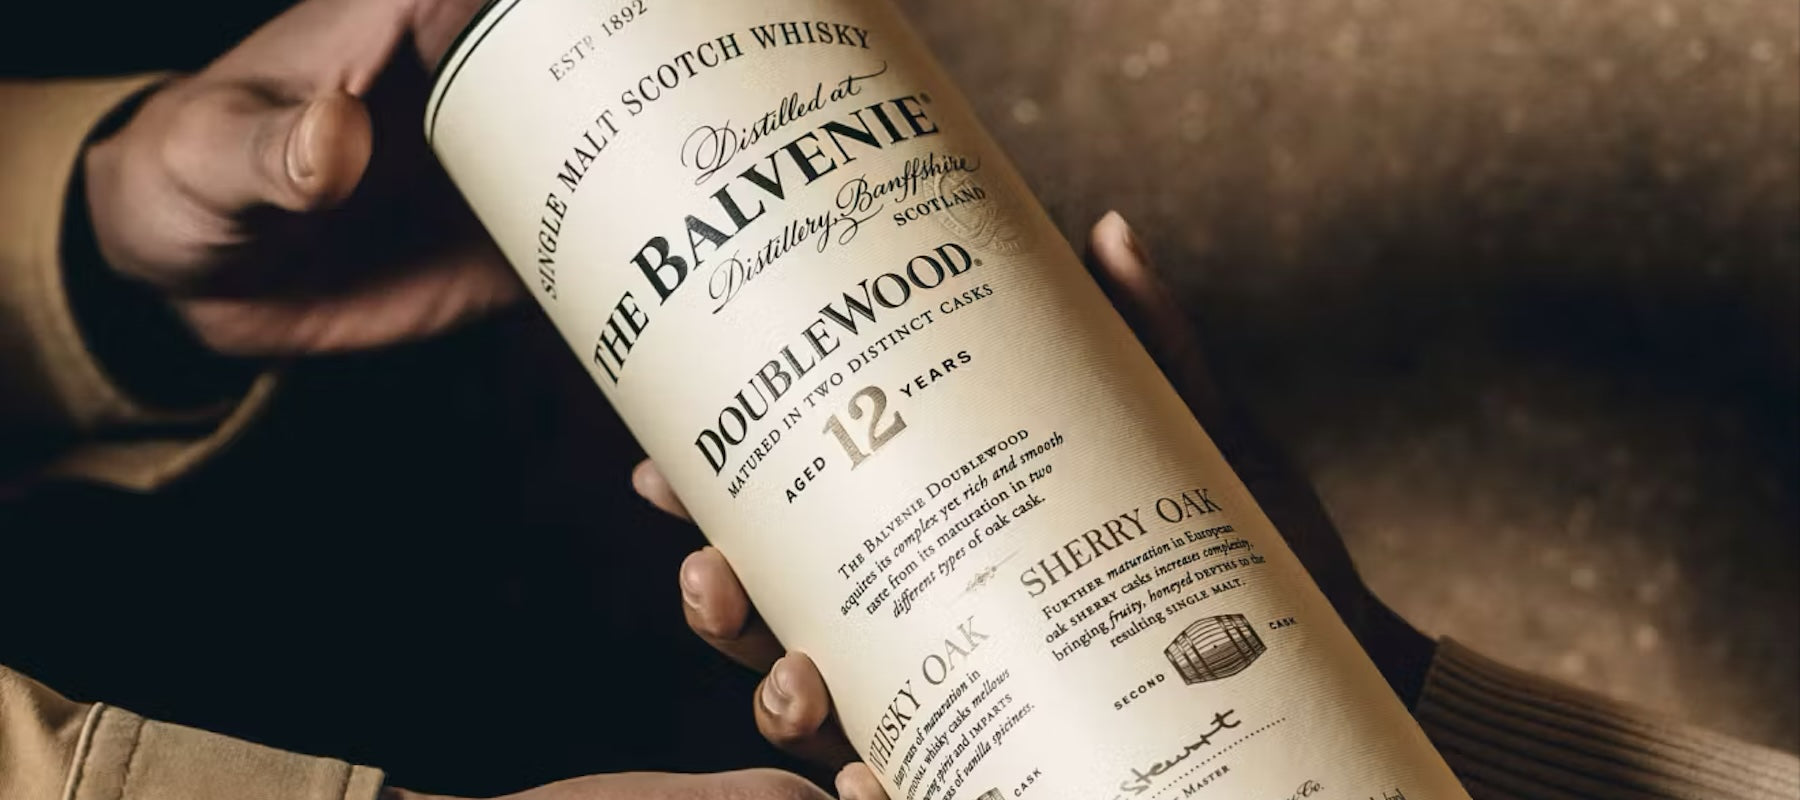 Whisky Under £50 Review 19: Balvenie 12 Year Old DoubleWood